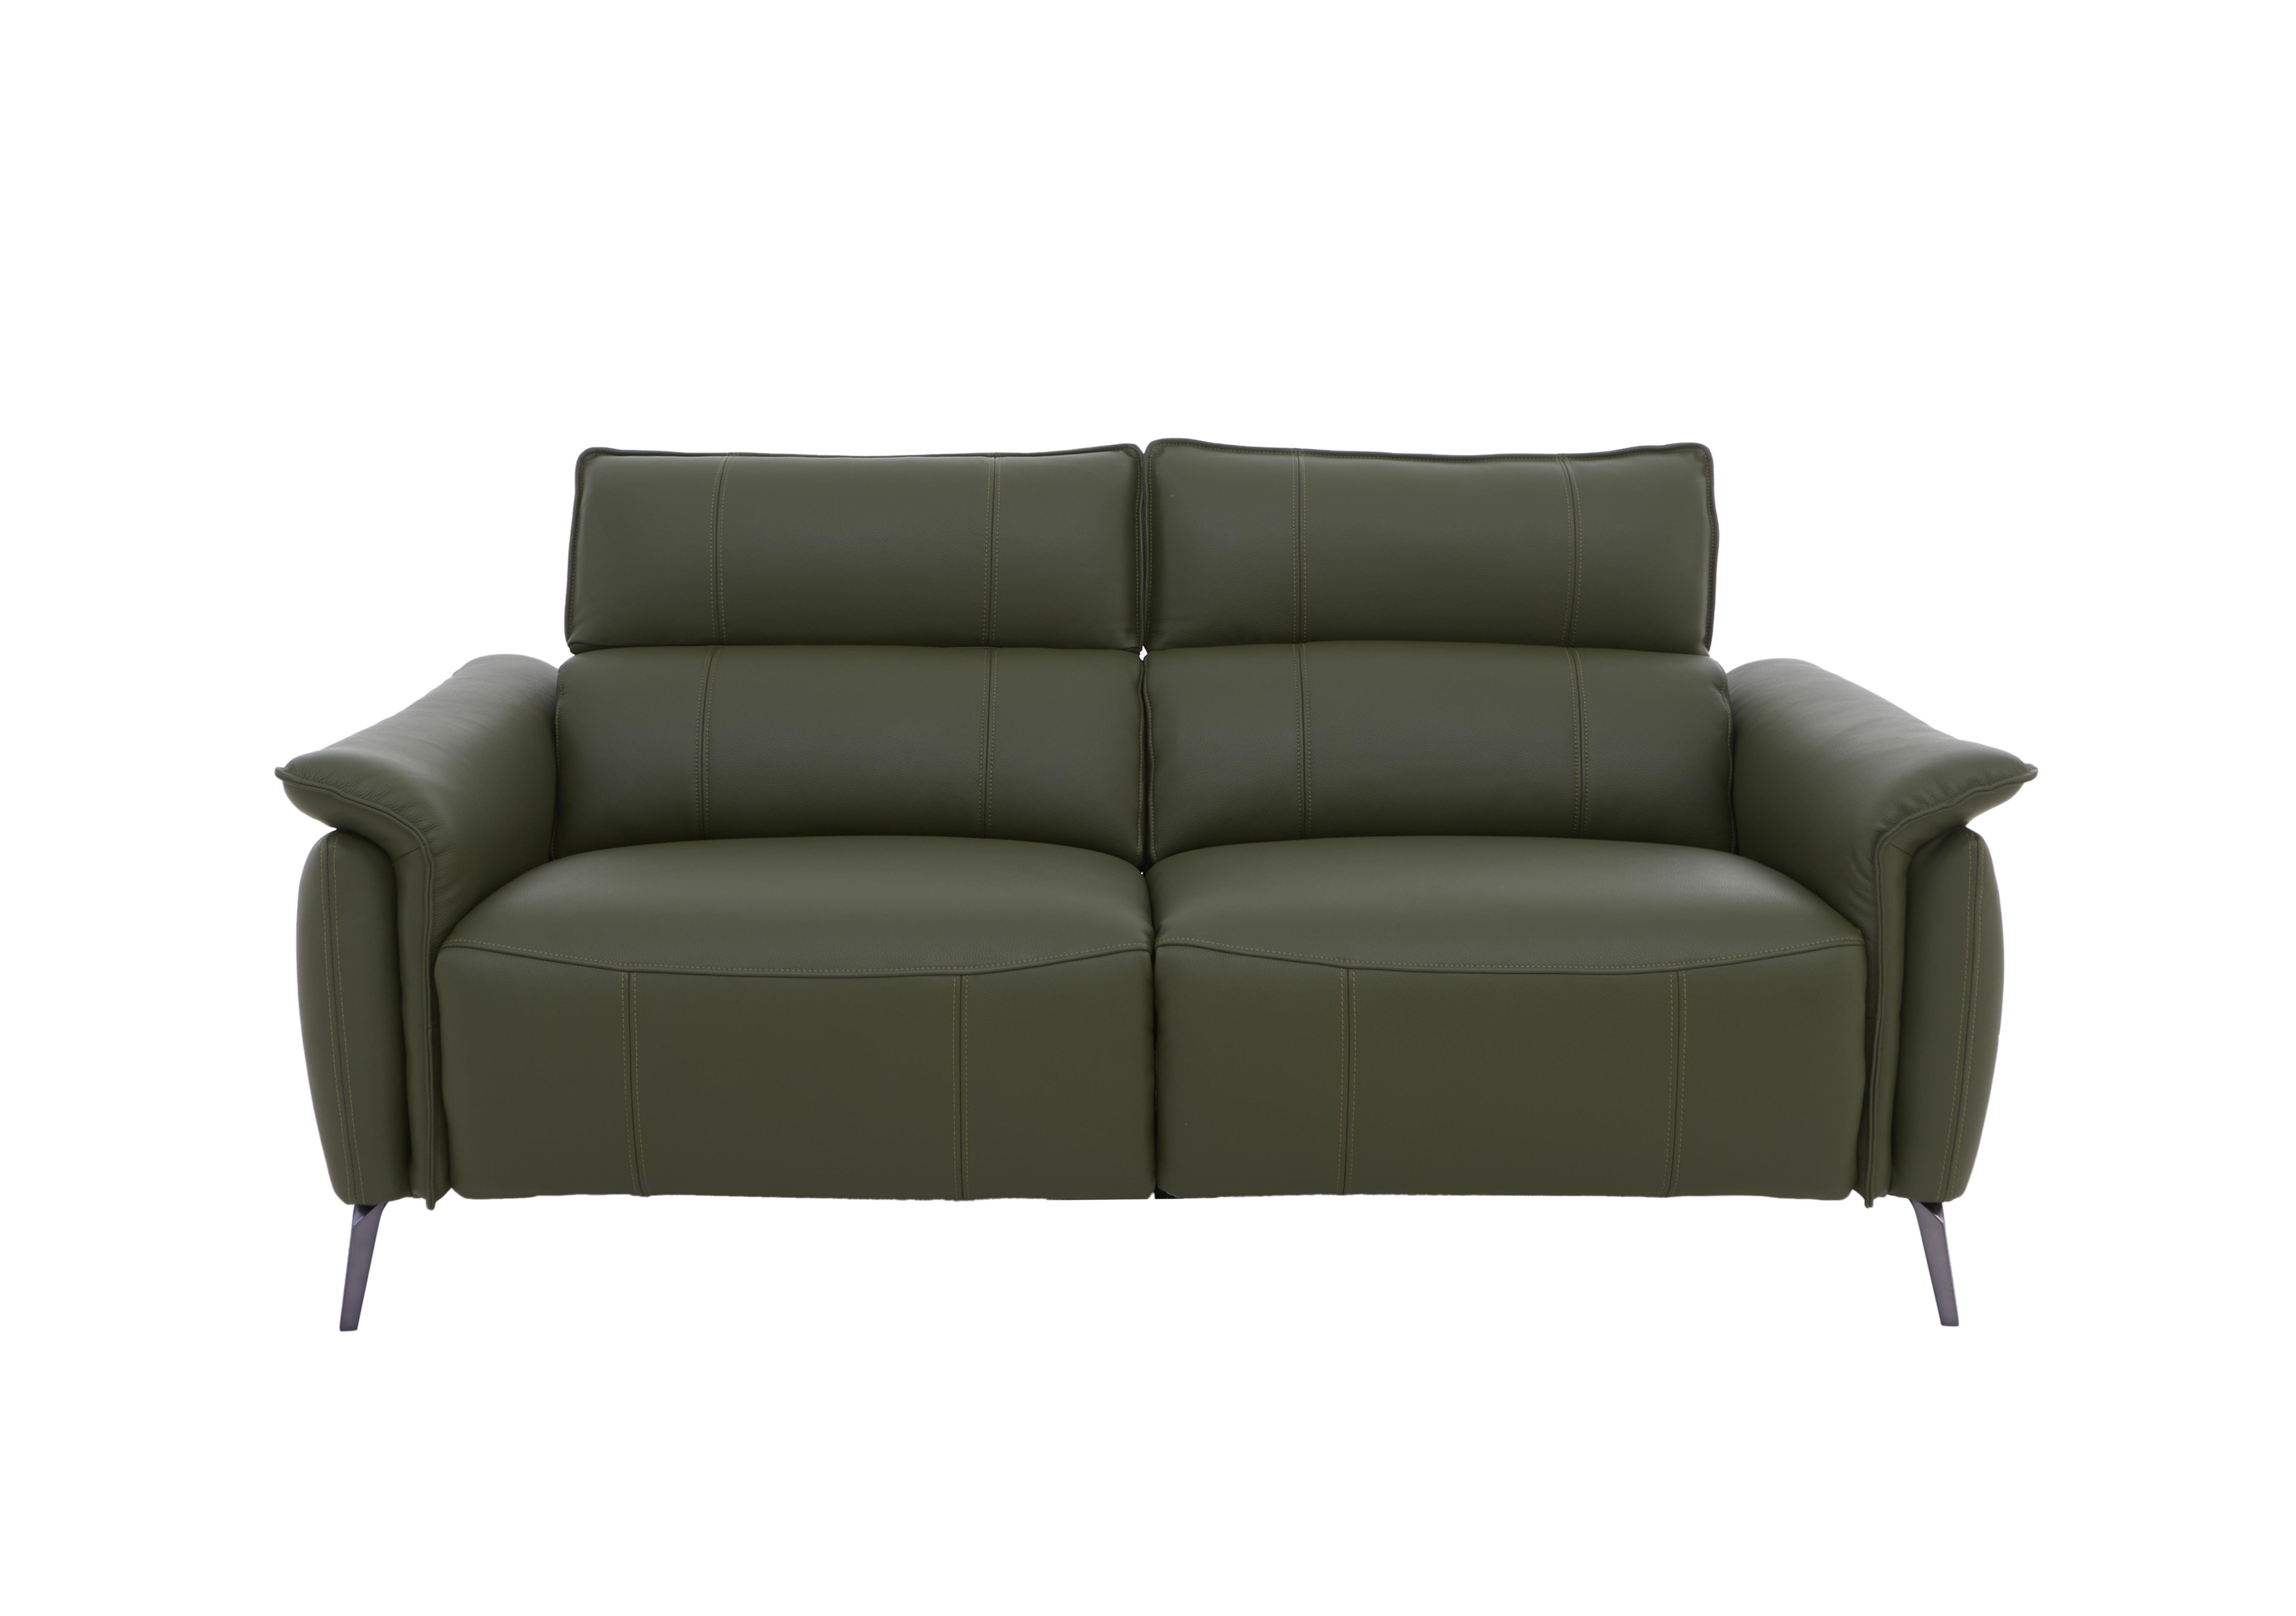 Jude 3 Seater Leather Sofa in Montana Oslo Pine Cat-40/10 on Furniture Village